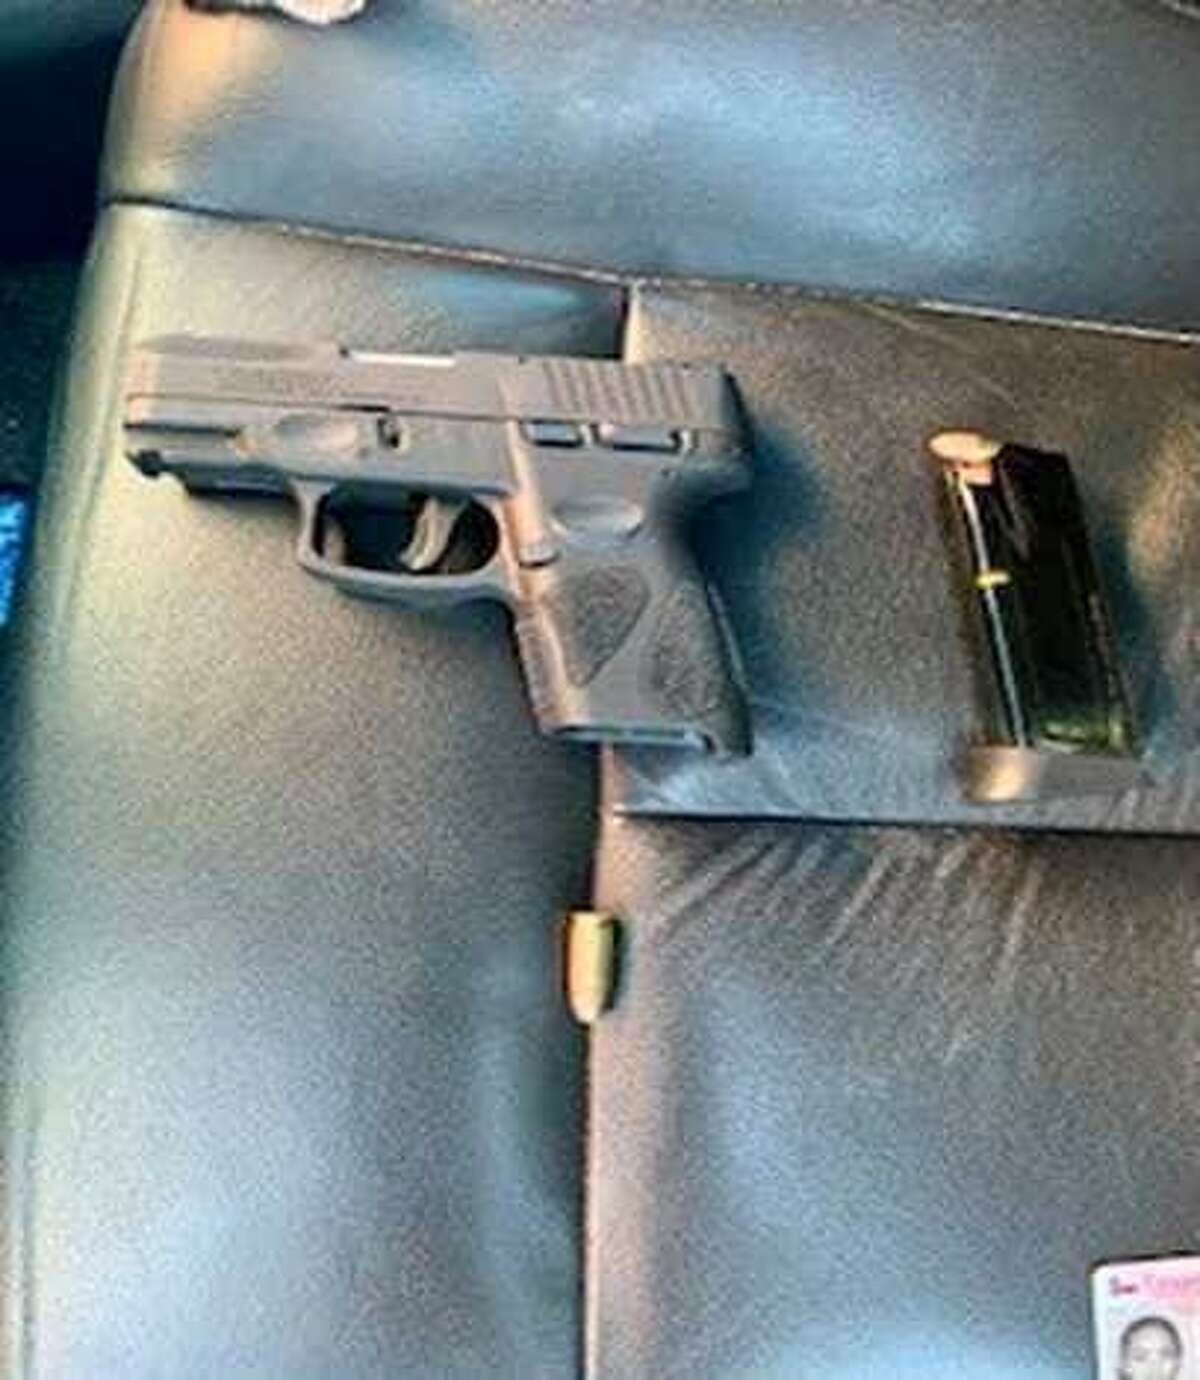 The Texas Department of Public Safety said they seized this gun from a high-ranking Mexican Mafia member following a traffic stop in Laredo. The suspect is facing state and federal charges.